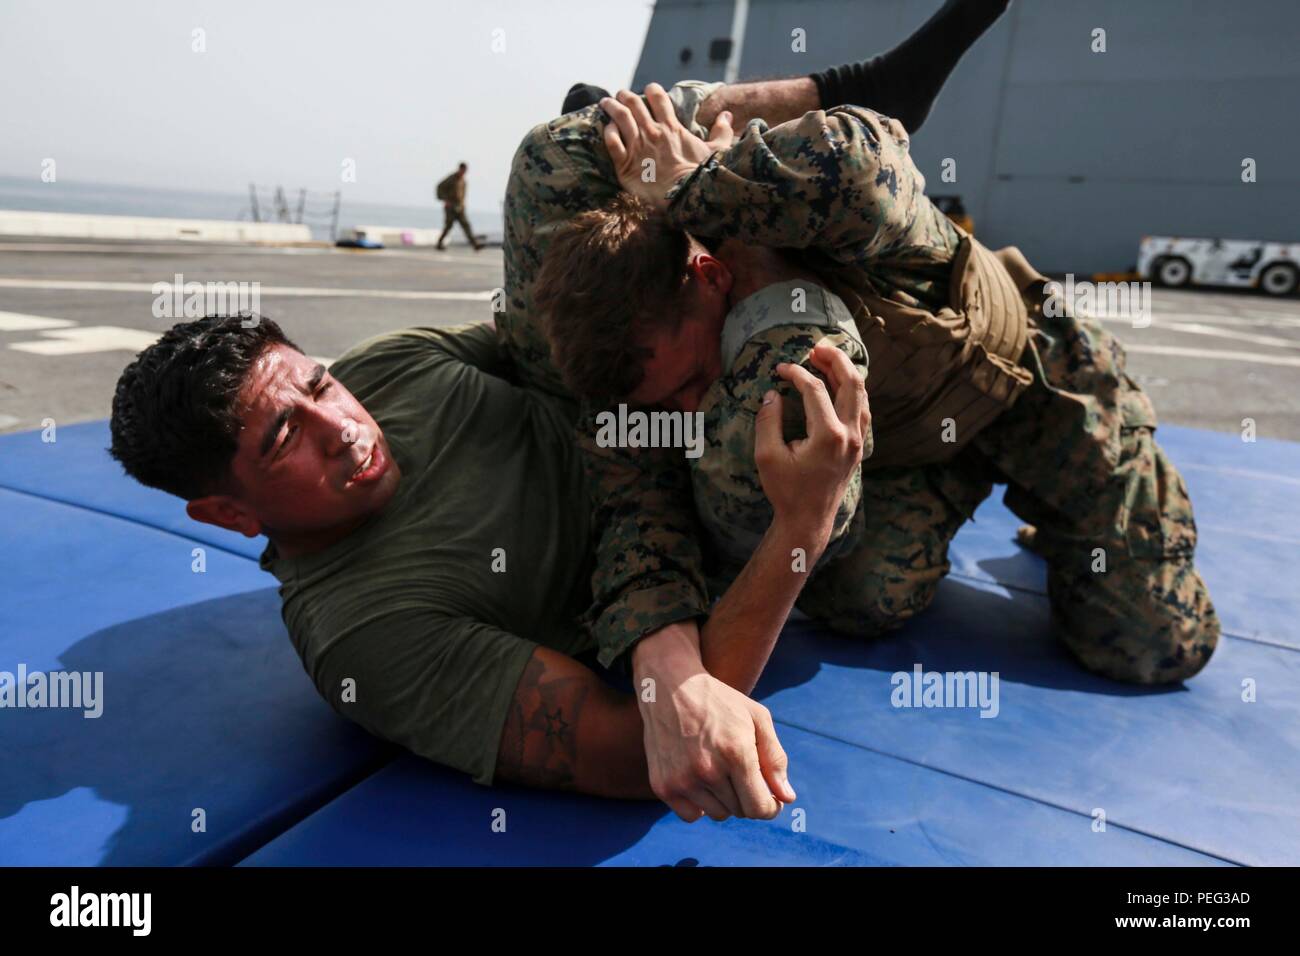 GULF OF ADEN (Aug. 18, 2015) U.S. Marine Sgt. Joshua Ruiz, left, grapples with Lance Cpl. Joshua D. Hancock during a Marine Corps martial arts program green belt course aboard the amphibious transport dock ship USS Anchorage (LPD 23). Ruiz is an operations clerk and Hancock is an armorer with Combat Logistics Battalion 15, 15th Marine Expeditionary Unit.  The 15th MEU is embarked on the Essex Amphibious Ready Group and deployed in support of maritime security operations and theater security cooperation efforts in the U.S. 5th Fleet area of operations. (U.S. Marine Corps photo by Sgt. Steve H.  Stock Photo